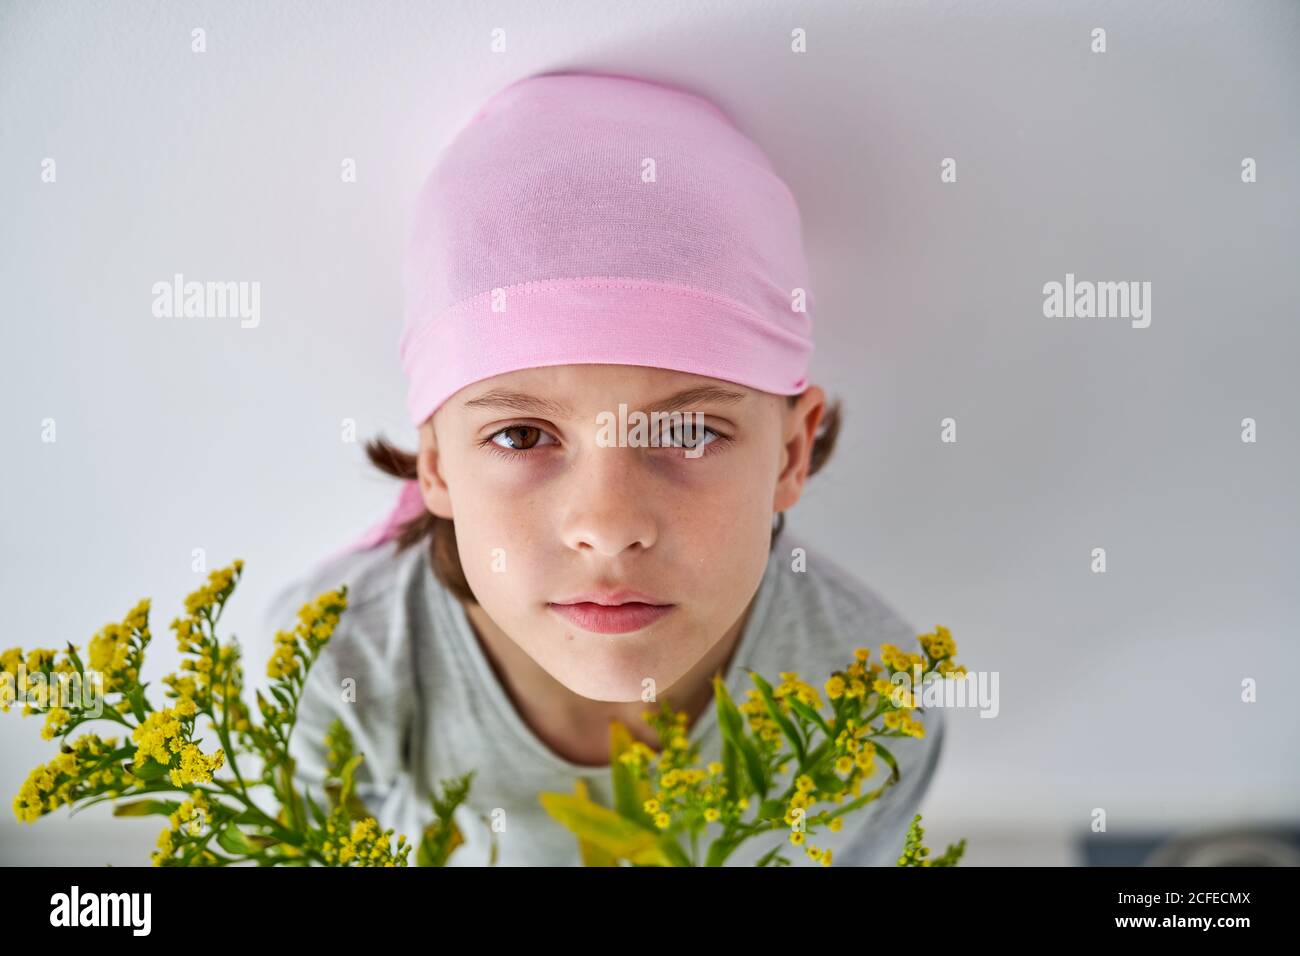 Focused little boy with cancer diagnosis wearing pink bandana and looking at camera while holding vase with flowers and standing at wall Stock Photo